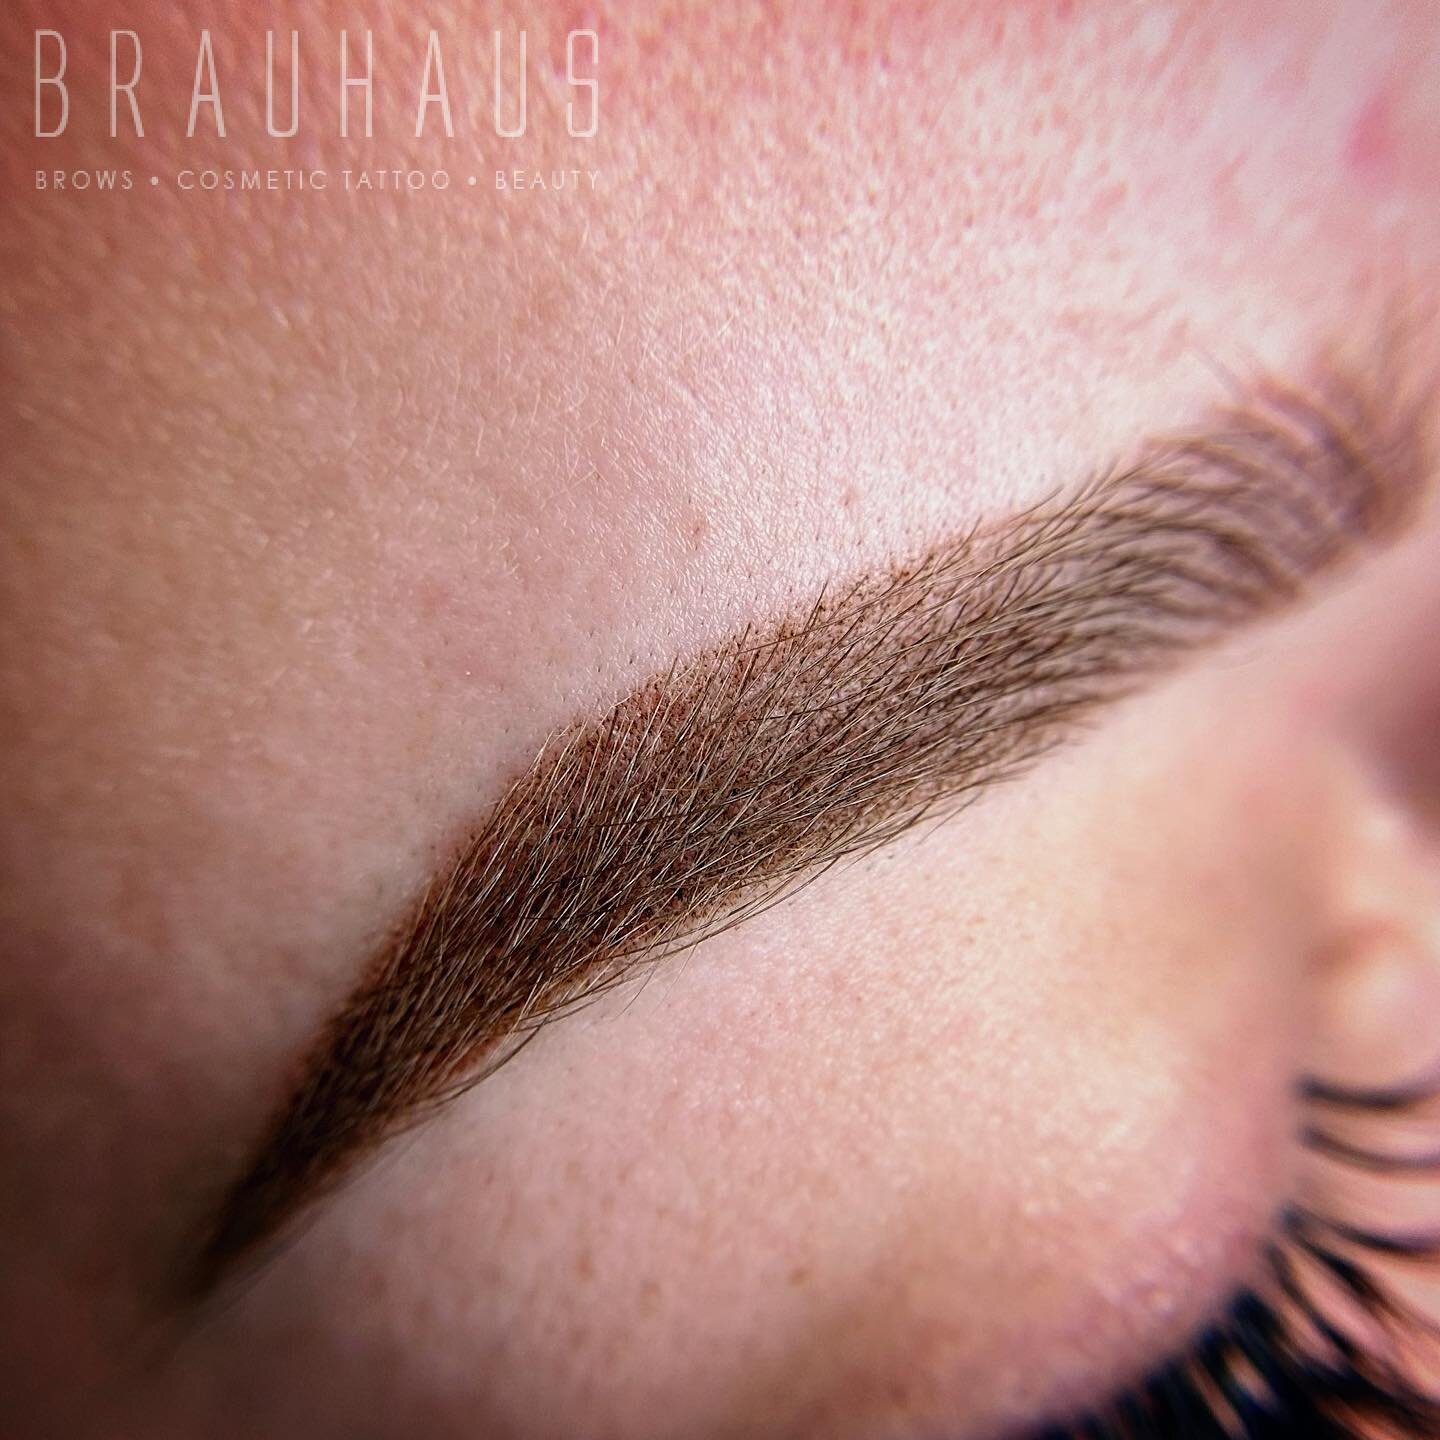 Borderless shading and clean hairstrokes to create a soft and natural combo brow. The best of both worlds! What do you think?

Do you want to learn this technique? New training dates are dropping soon! 

&bull;&bull;&bull;

#brauhausstudio #brauhausm